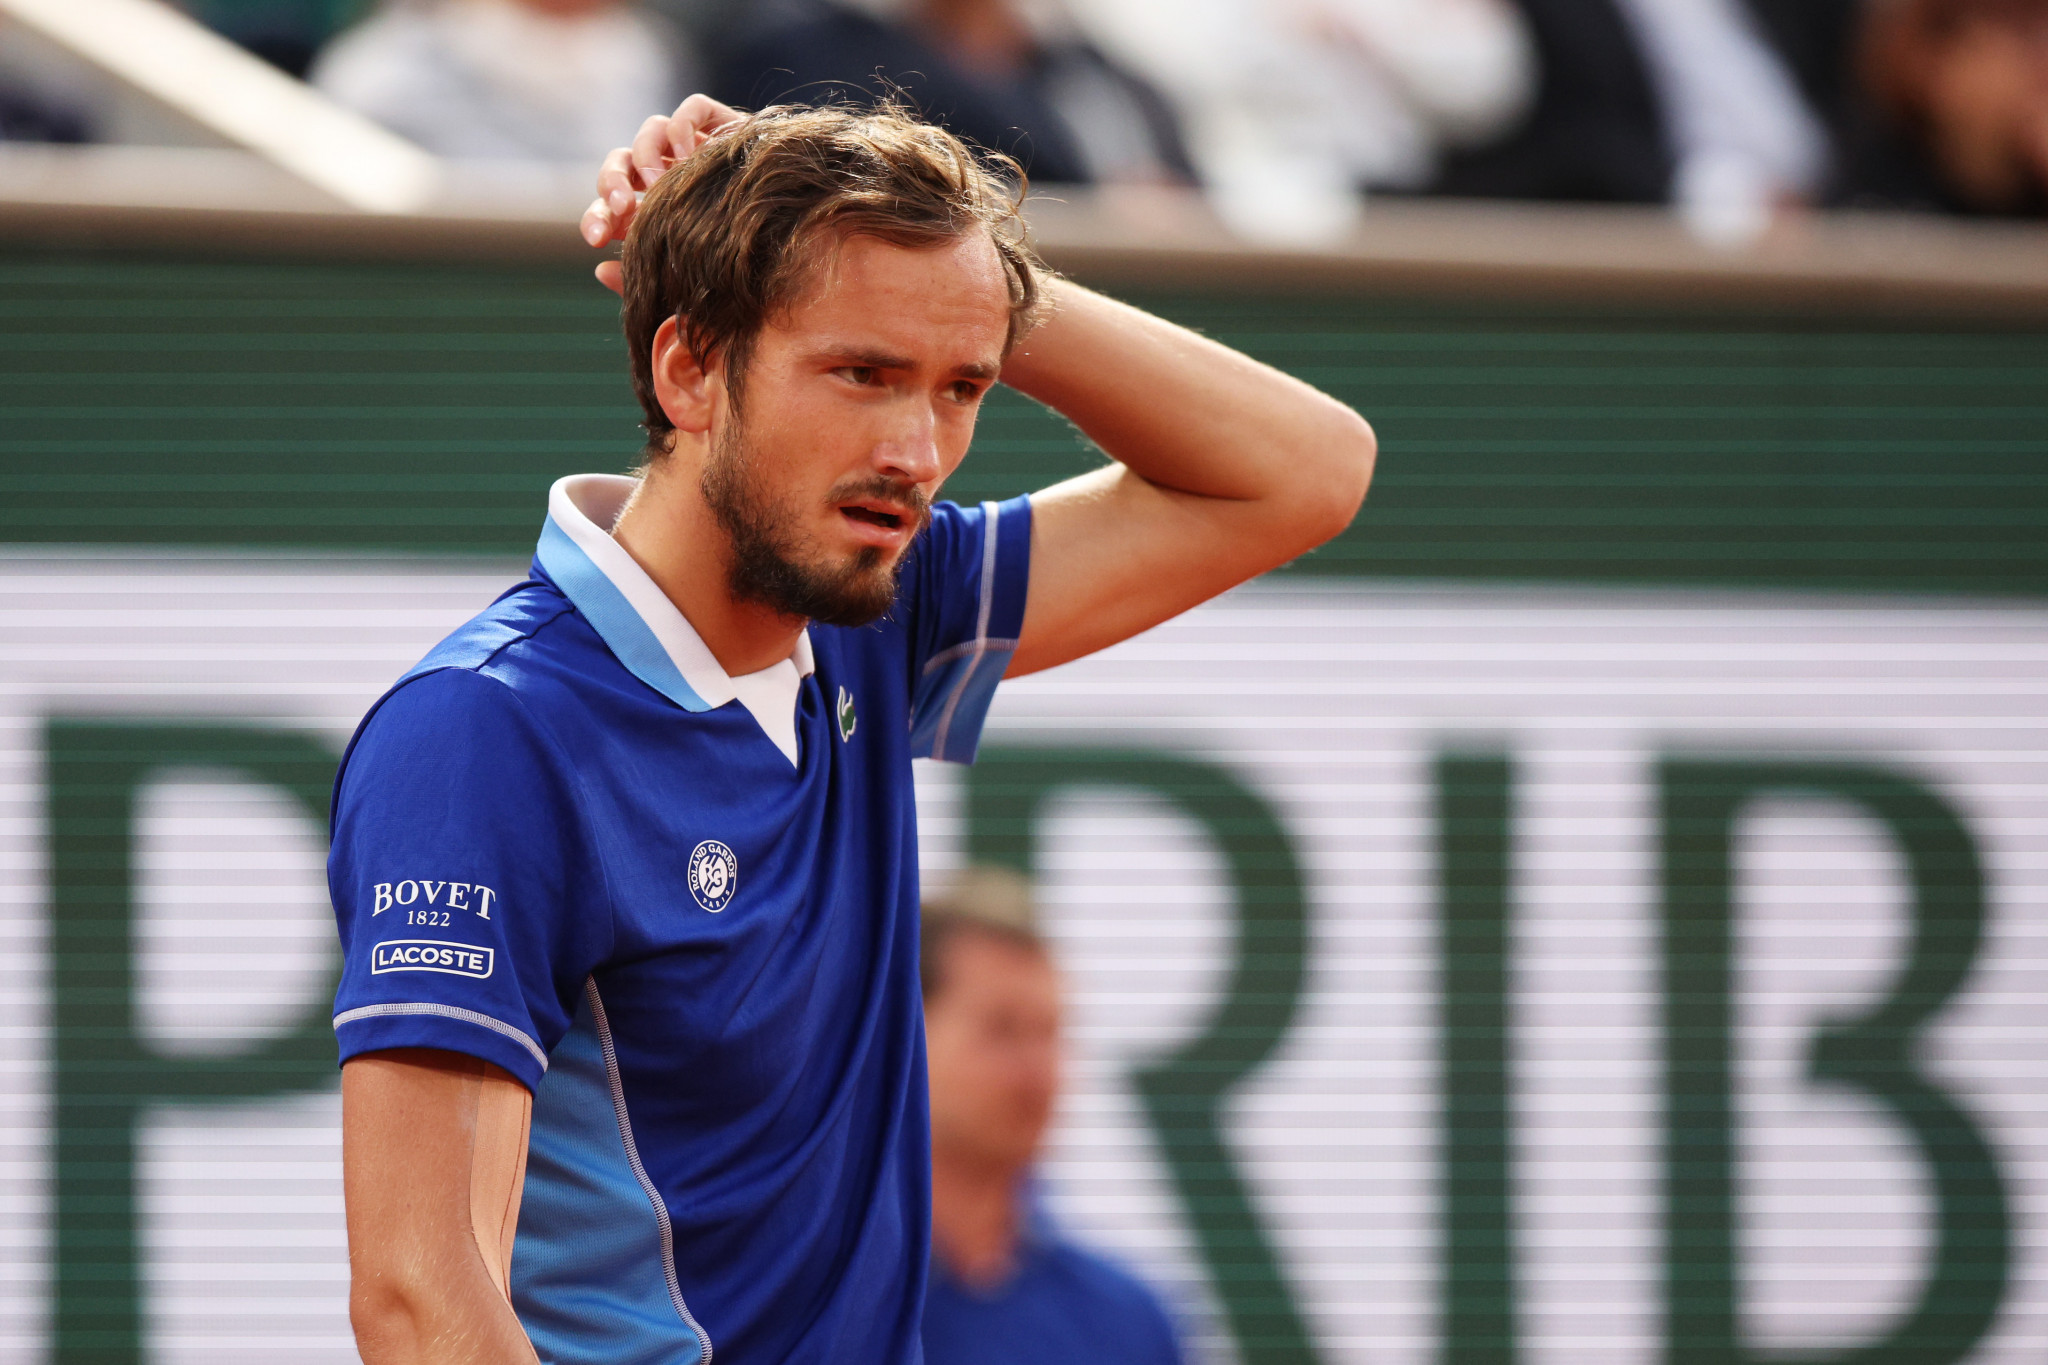 Second seed Daniil Medvedev was beaten in straight sets by Marin Cilic in the night session match at Roland Garros ©Getty Images